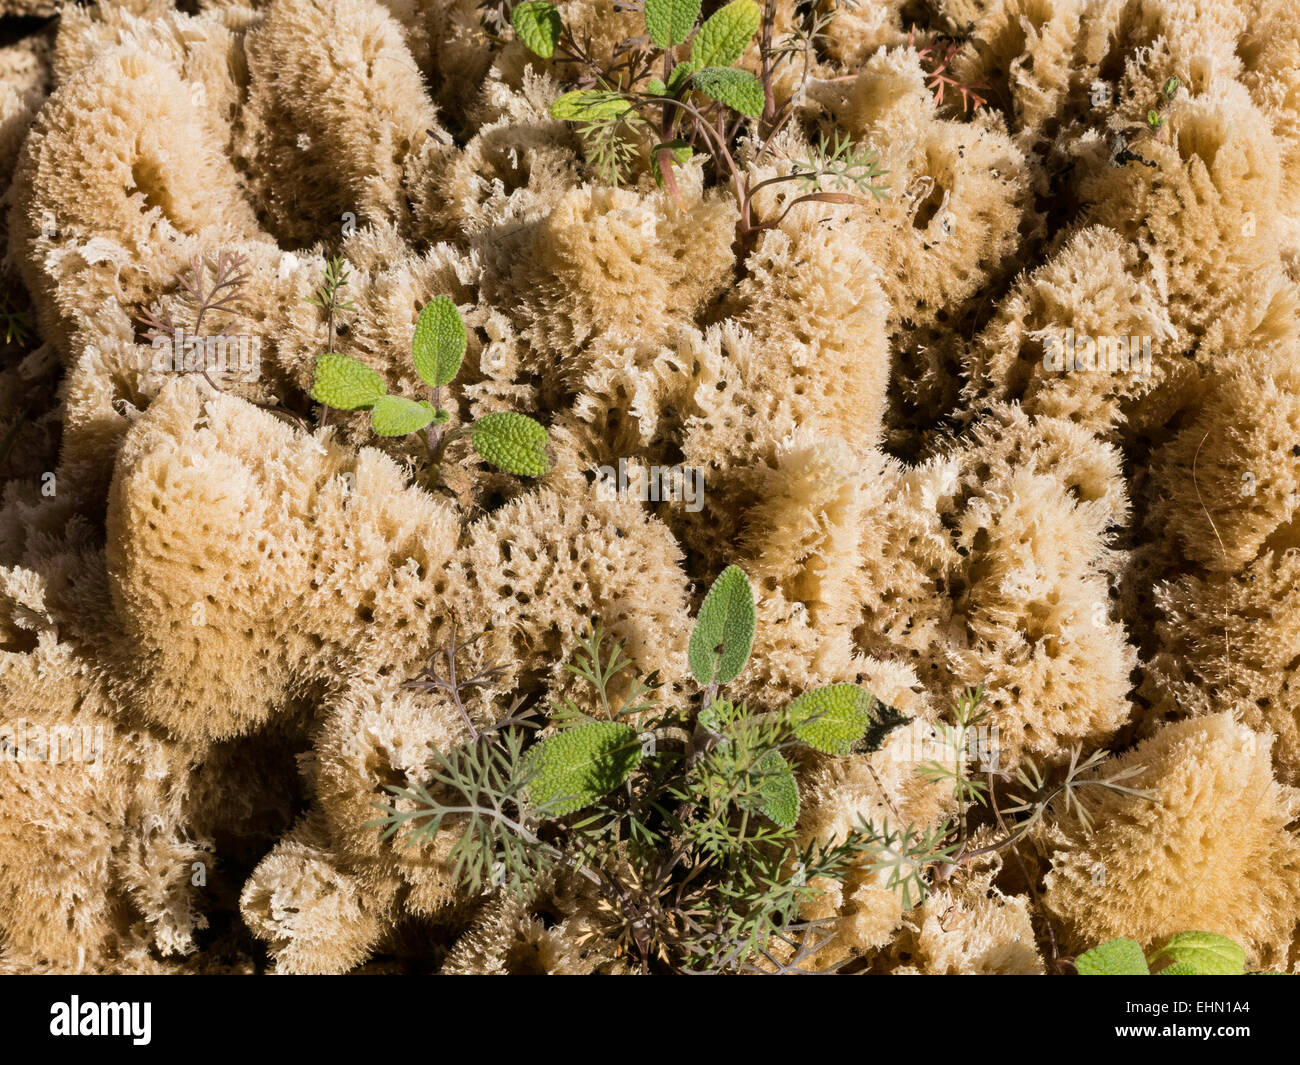 Natural Sponge with Plant Growth, Tarpon Springs, FL Stock Photo